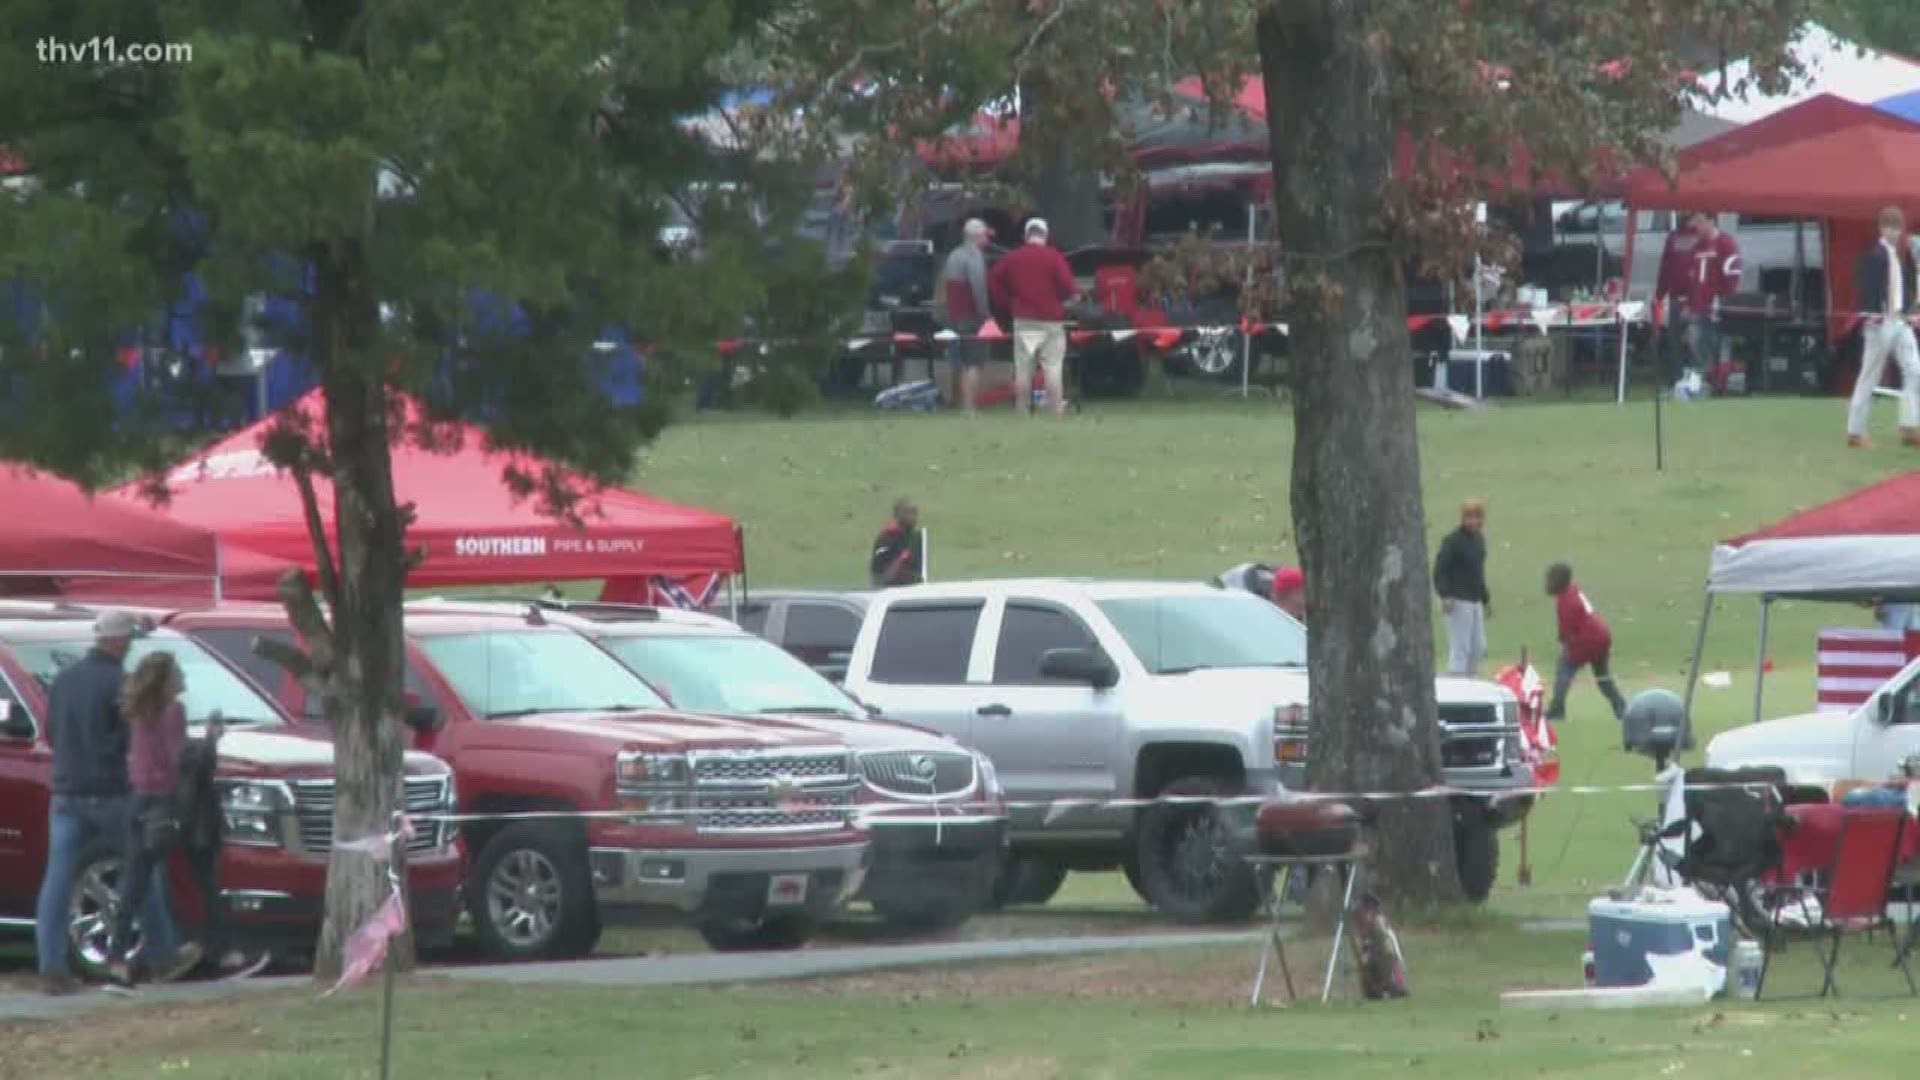 Hundreds of tents popped up in War Memorial Park as hog fans got excited for the game.